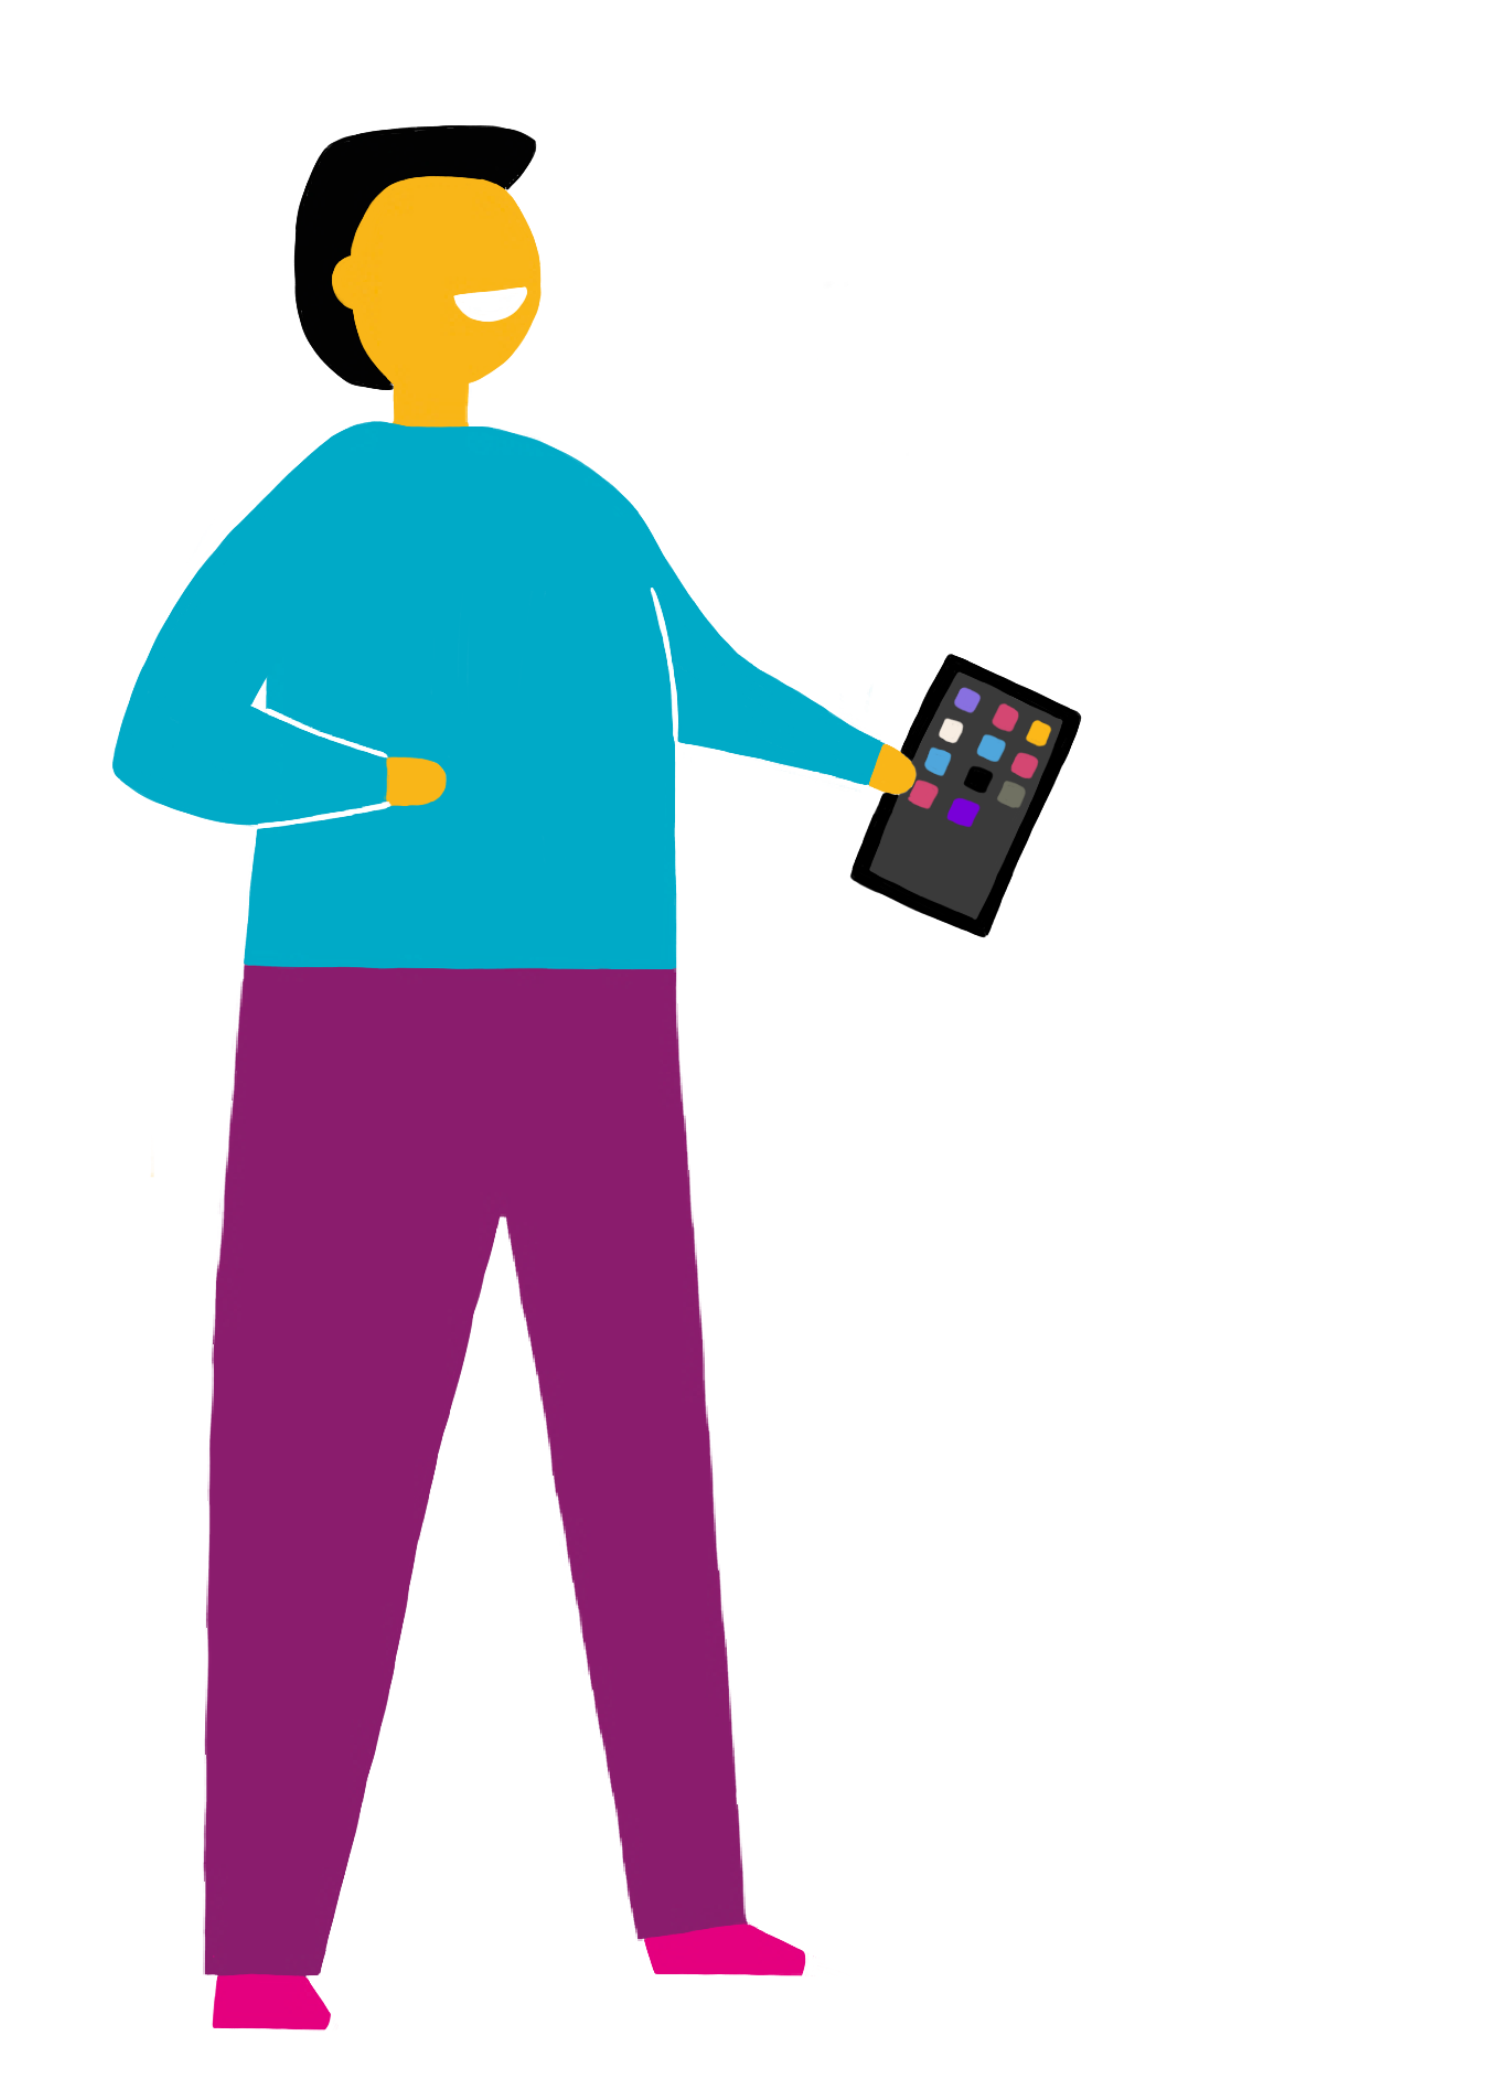 a person holding a tablet